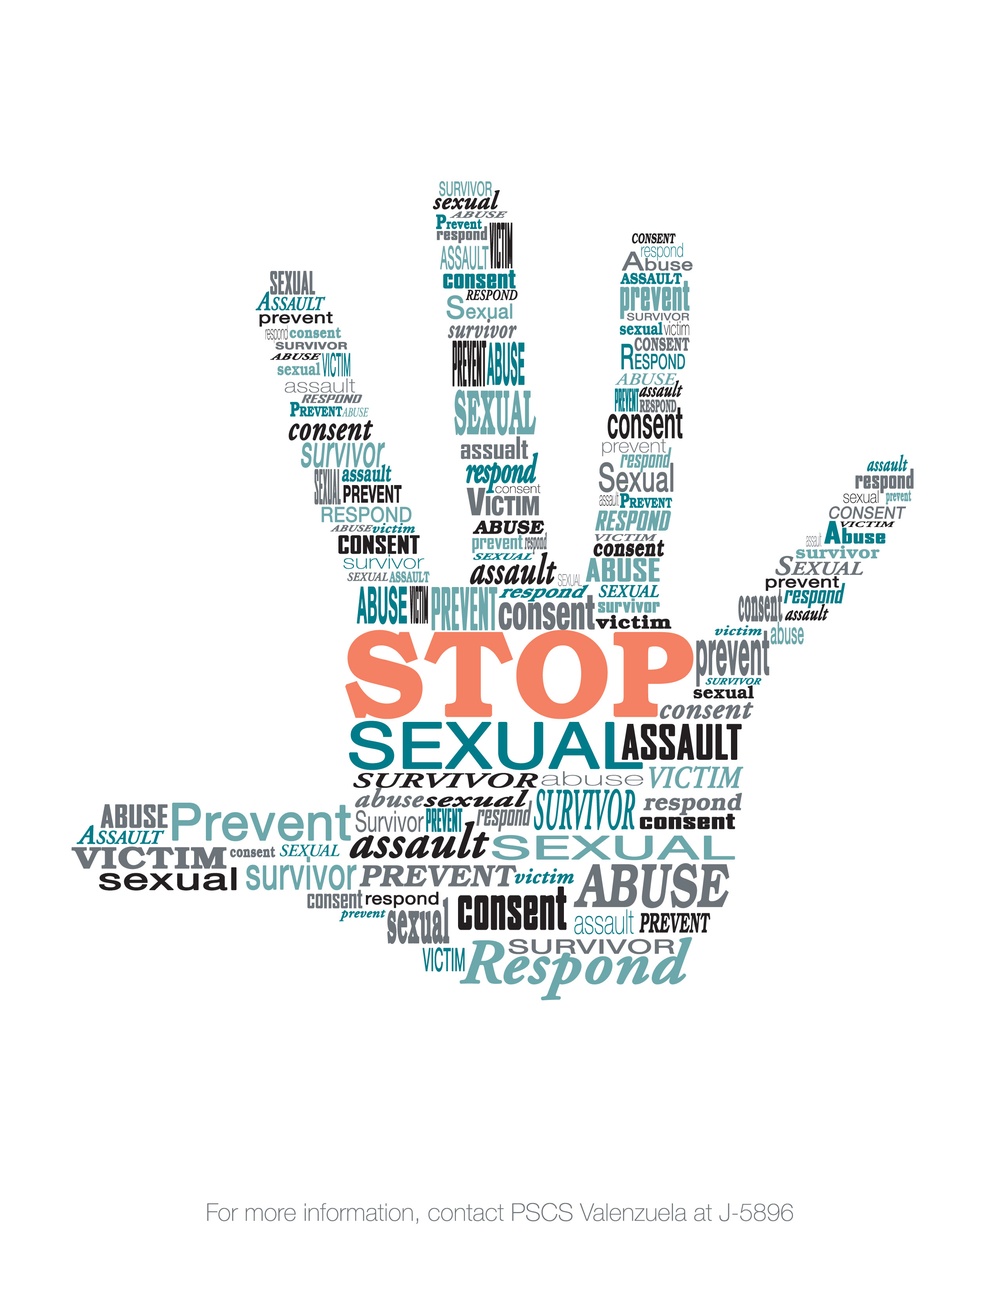 Sexual Assault and Response Poster